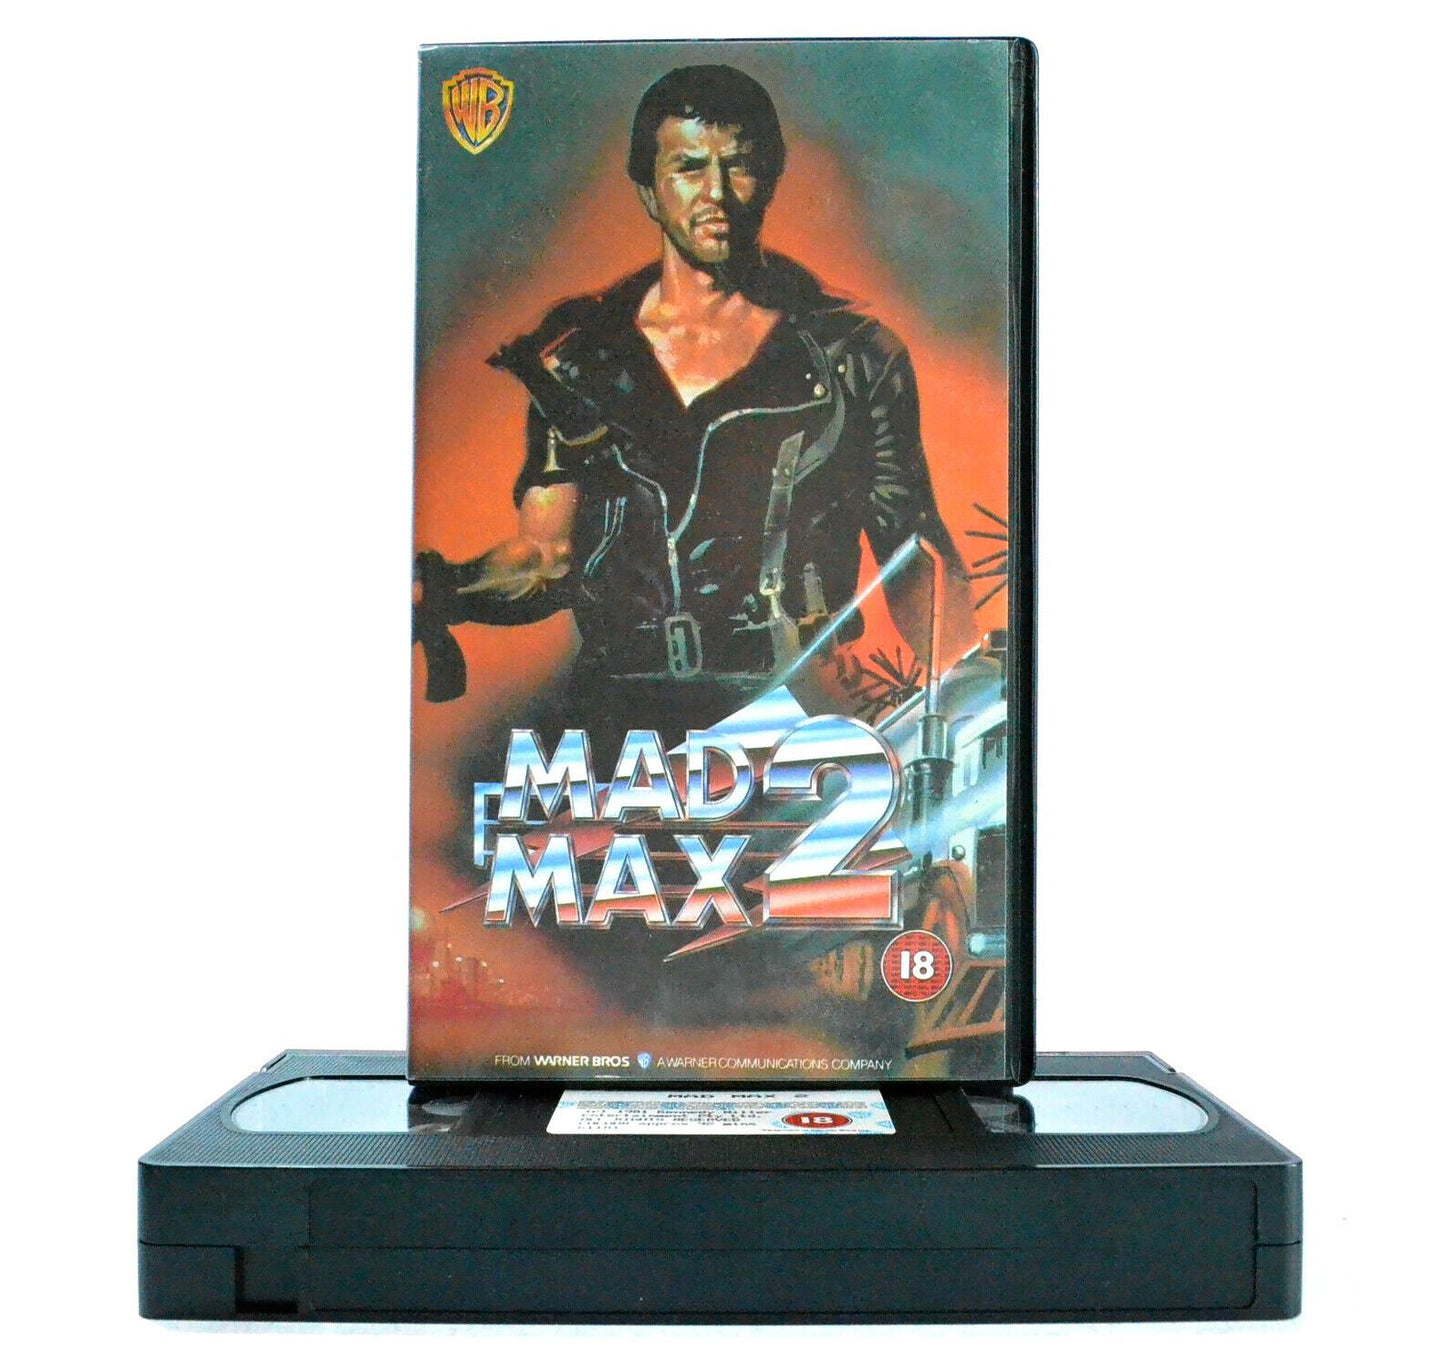 Mad Max 2: Sci-Fi/Action Adventure (1981) - Road Warrior - Mel Gibson - Pal VHS-